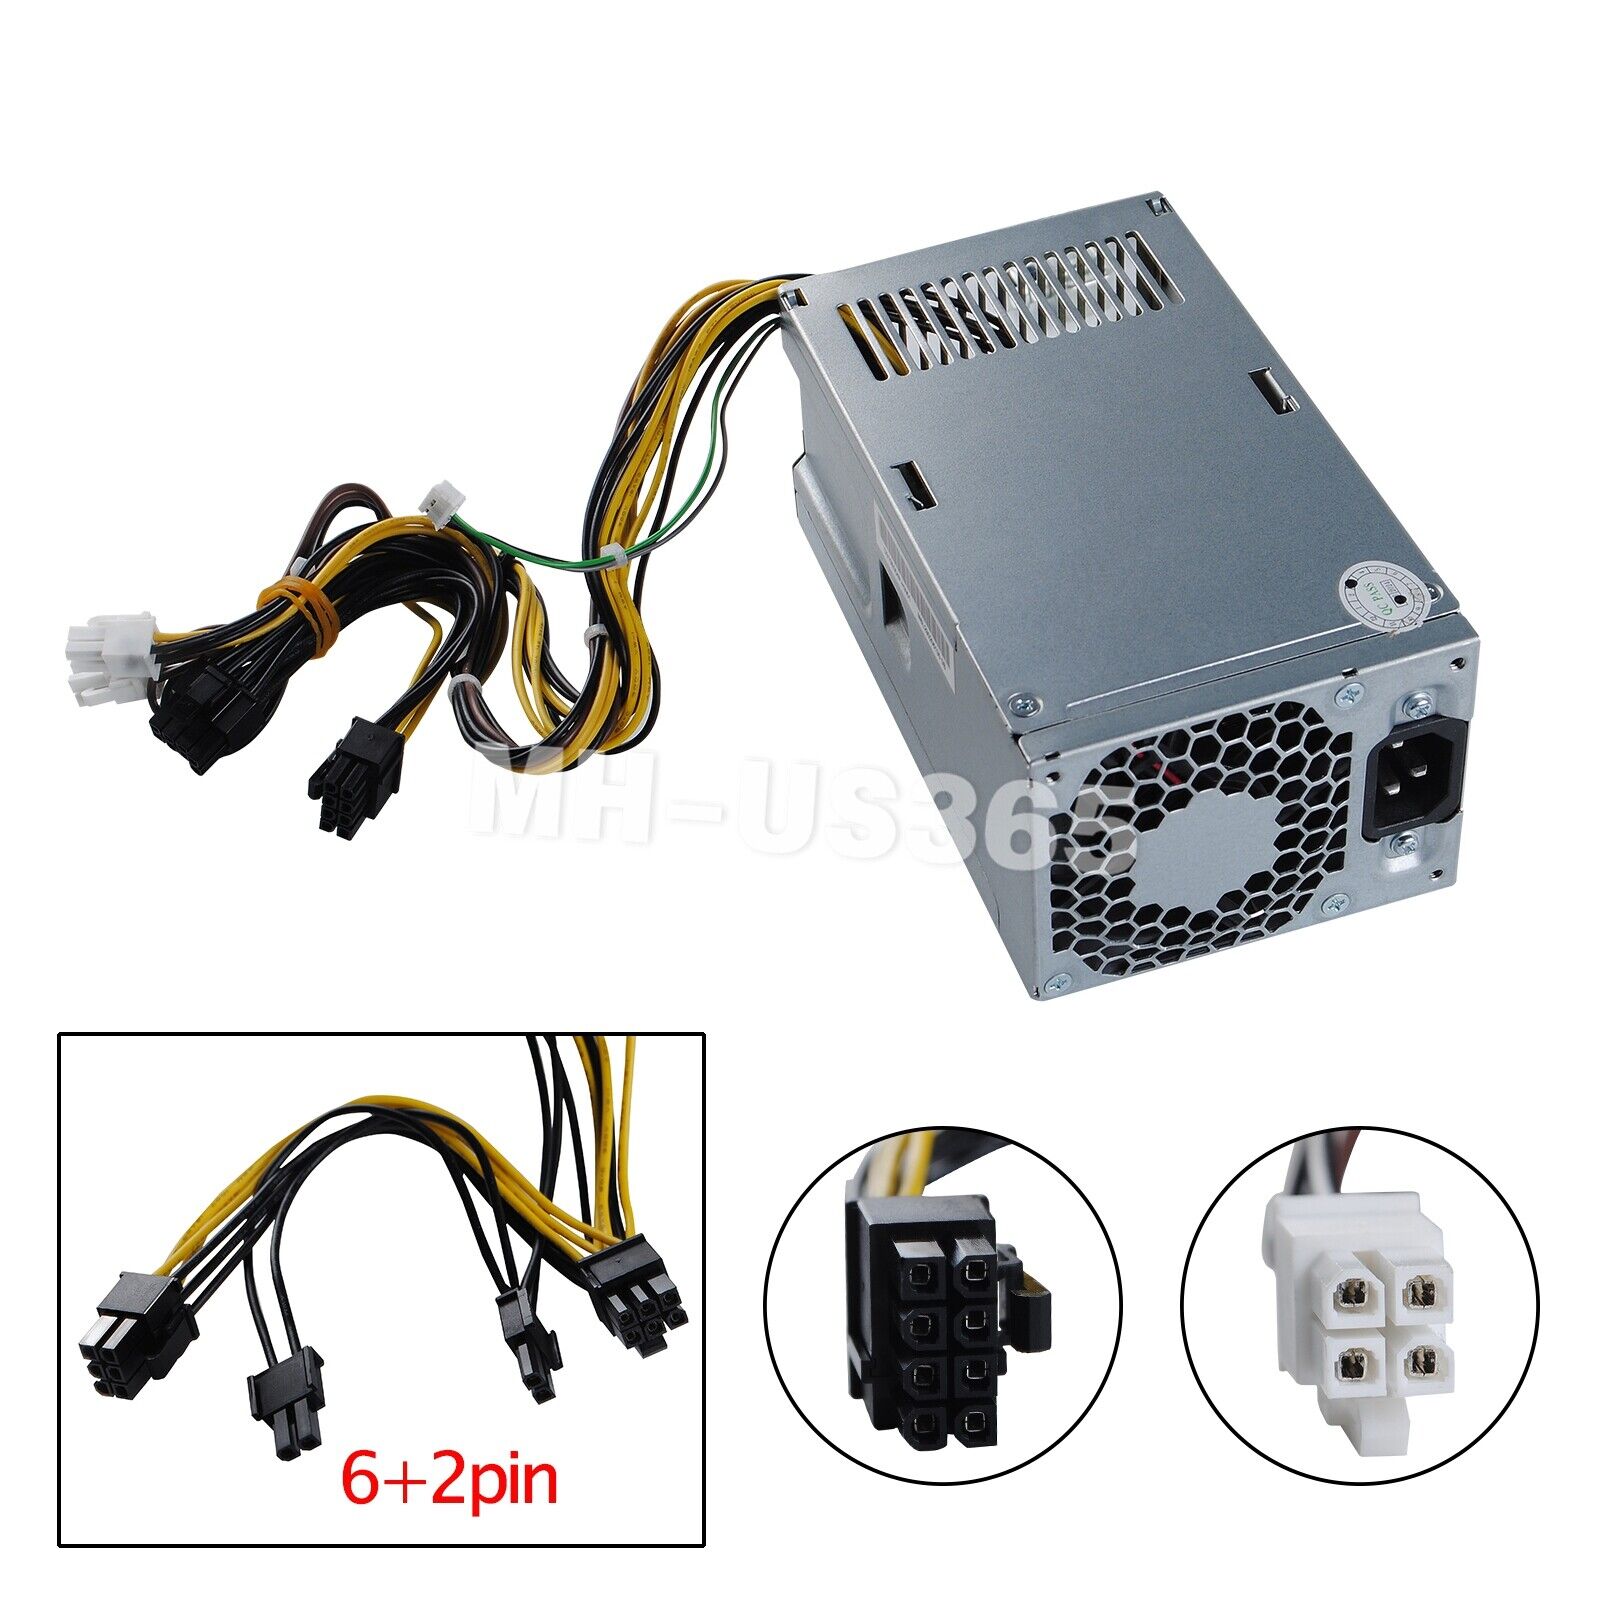 Power Supply for HP ProDesk 280 288 G3 310W PSU DPS-310AB-1A PCG007 901772-004 